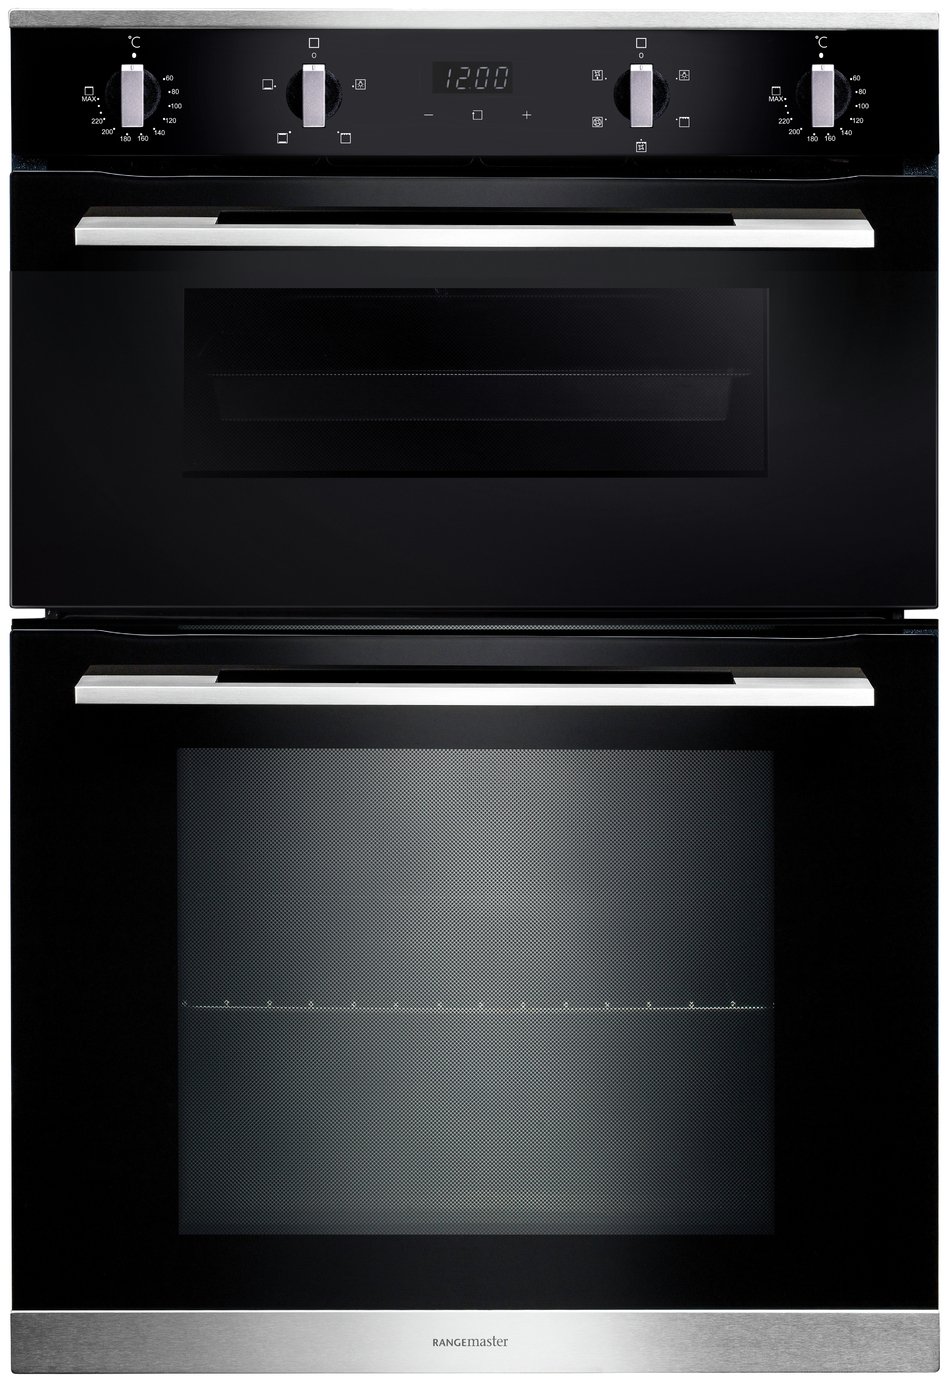 Rangemaster RMB9045BL Built In Double Electric Oven - Black